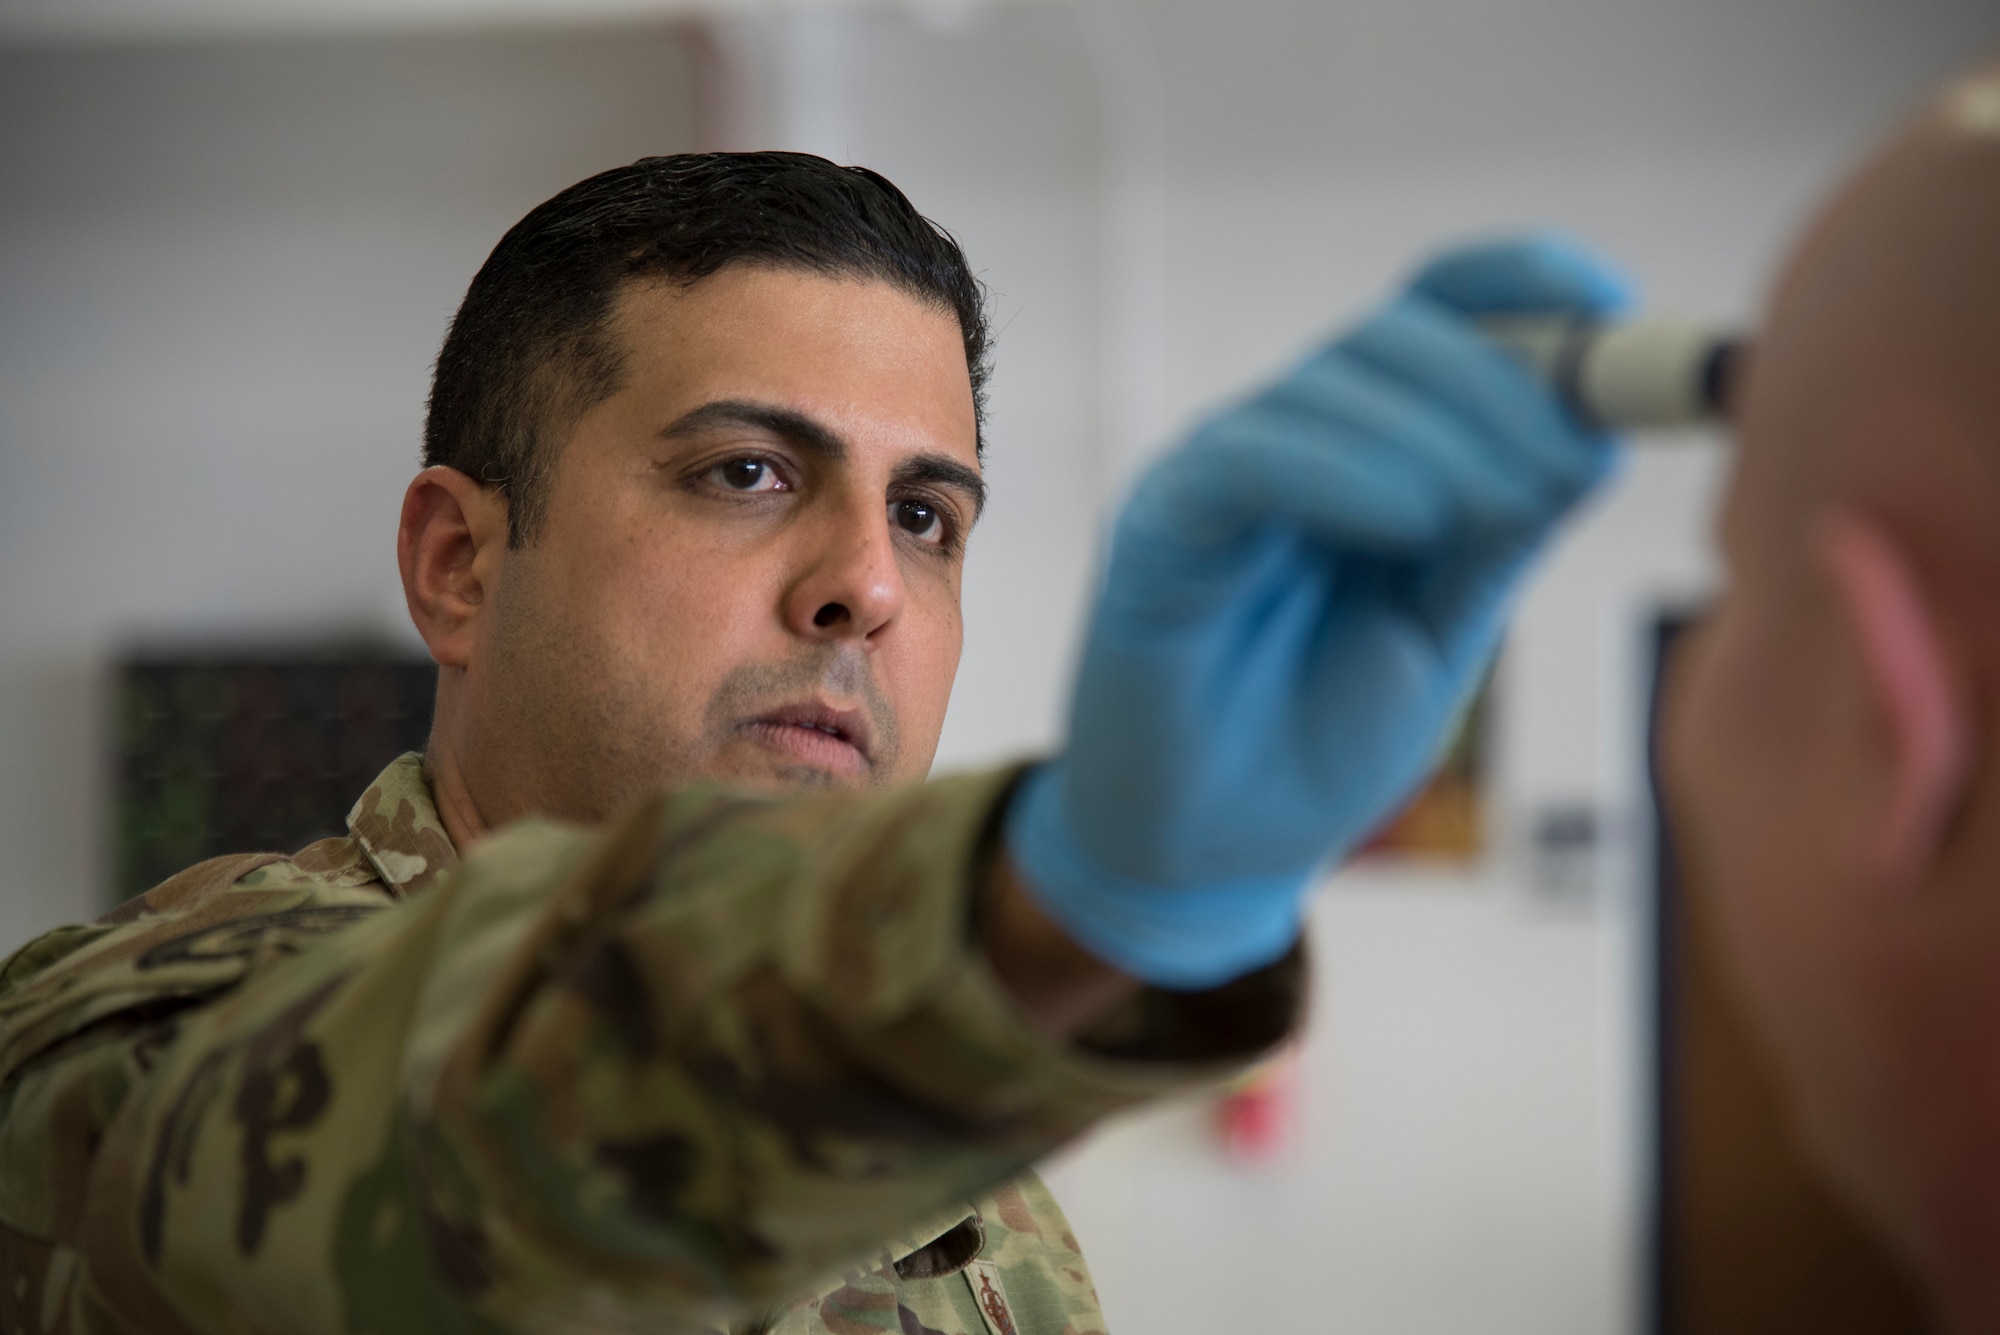 New Jersey Air National Guard Tech. Sgt. Emilio E. Gonzalez, a 108th Medical Group public health technician, administers a temperature screening to a Security Forces Airman at Joint Base McGuire-Dix-Lakehurst, New Jersey, March 19, 2020. The Medical Group screened members for possible fever, a common symptom of COVID-19, before being put on state active duty orders. (U.S. Air National Guard photo by Airman 1st Class Andrea A. S. Williamson)